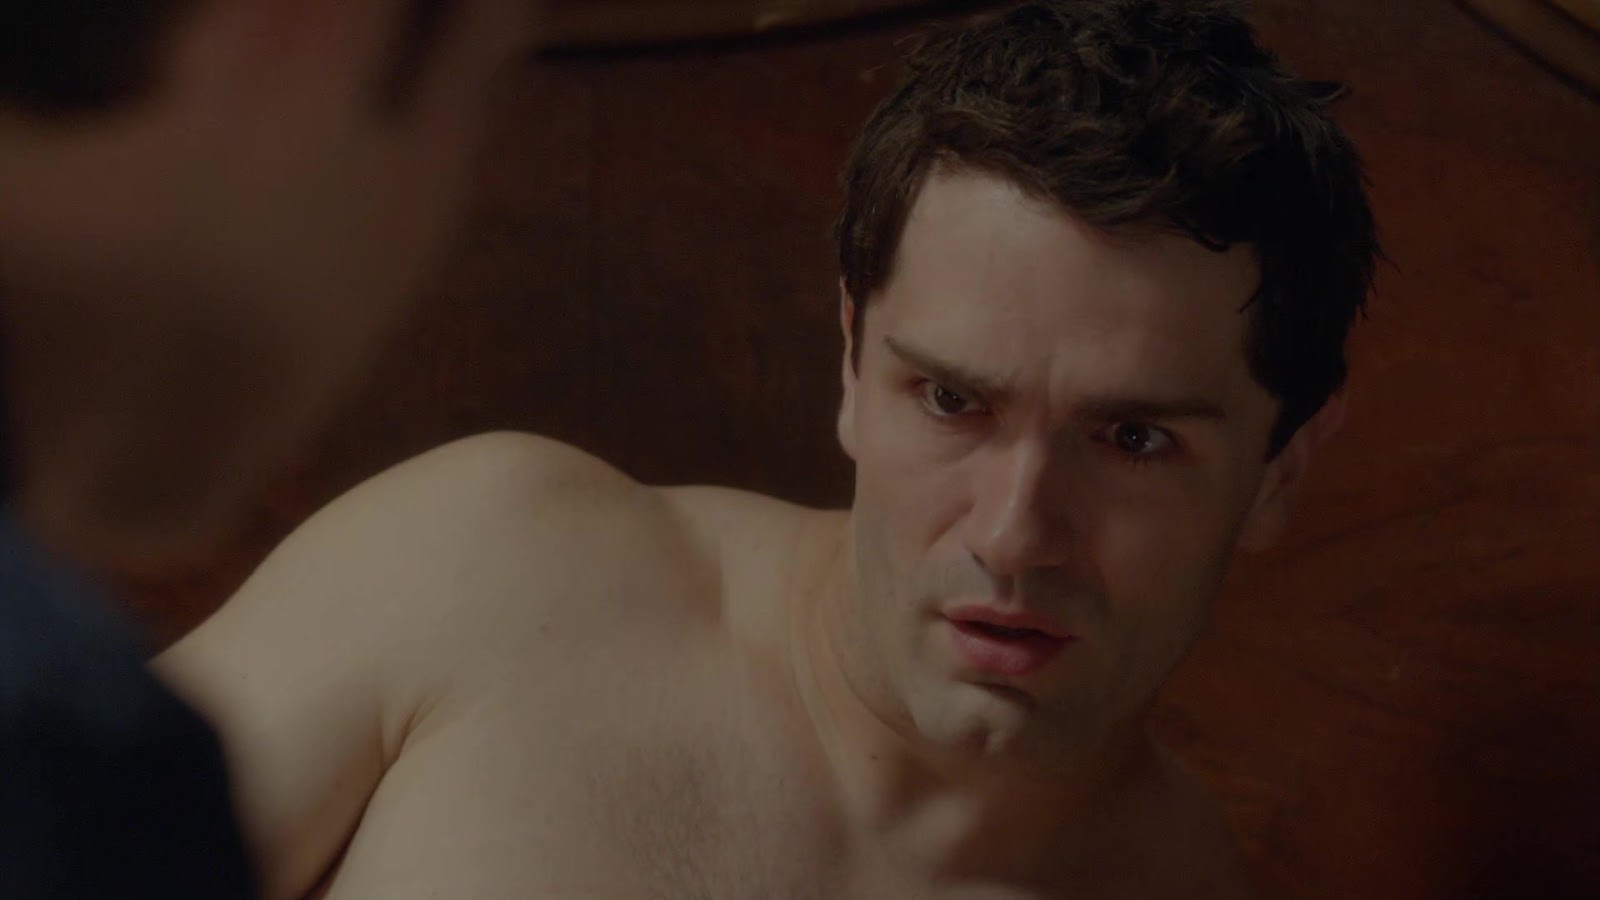 Sam Witwer shirtless in Being Human 4-04 "The Panic Womb" .